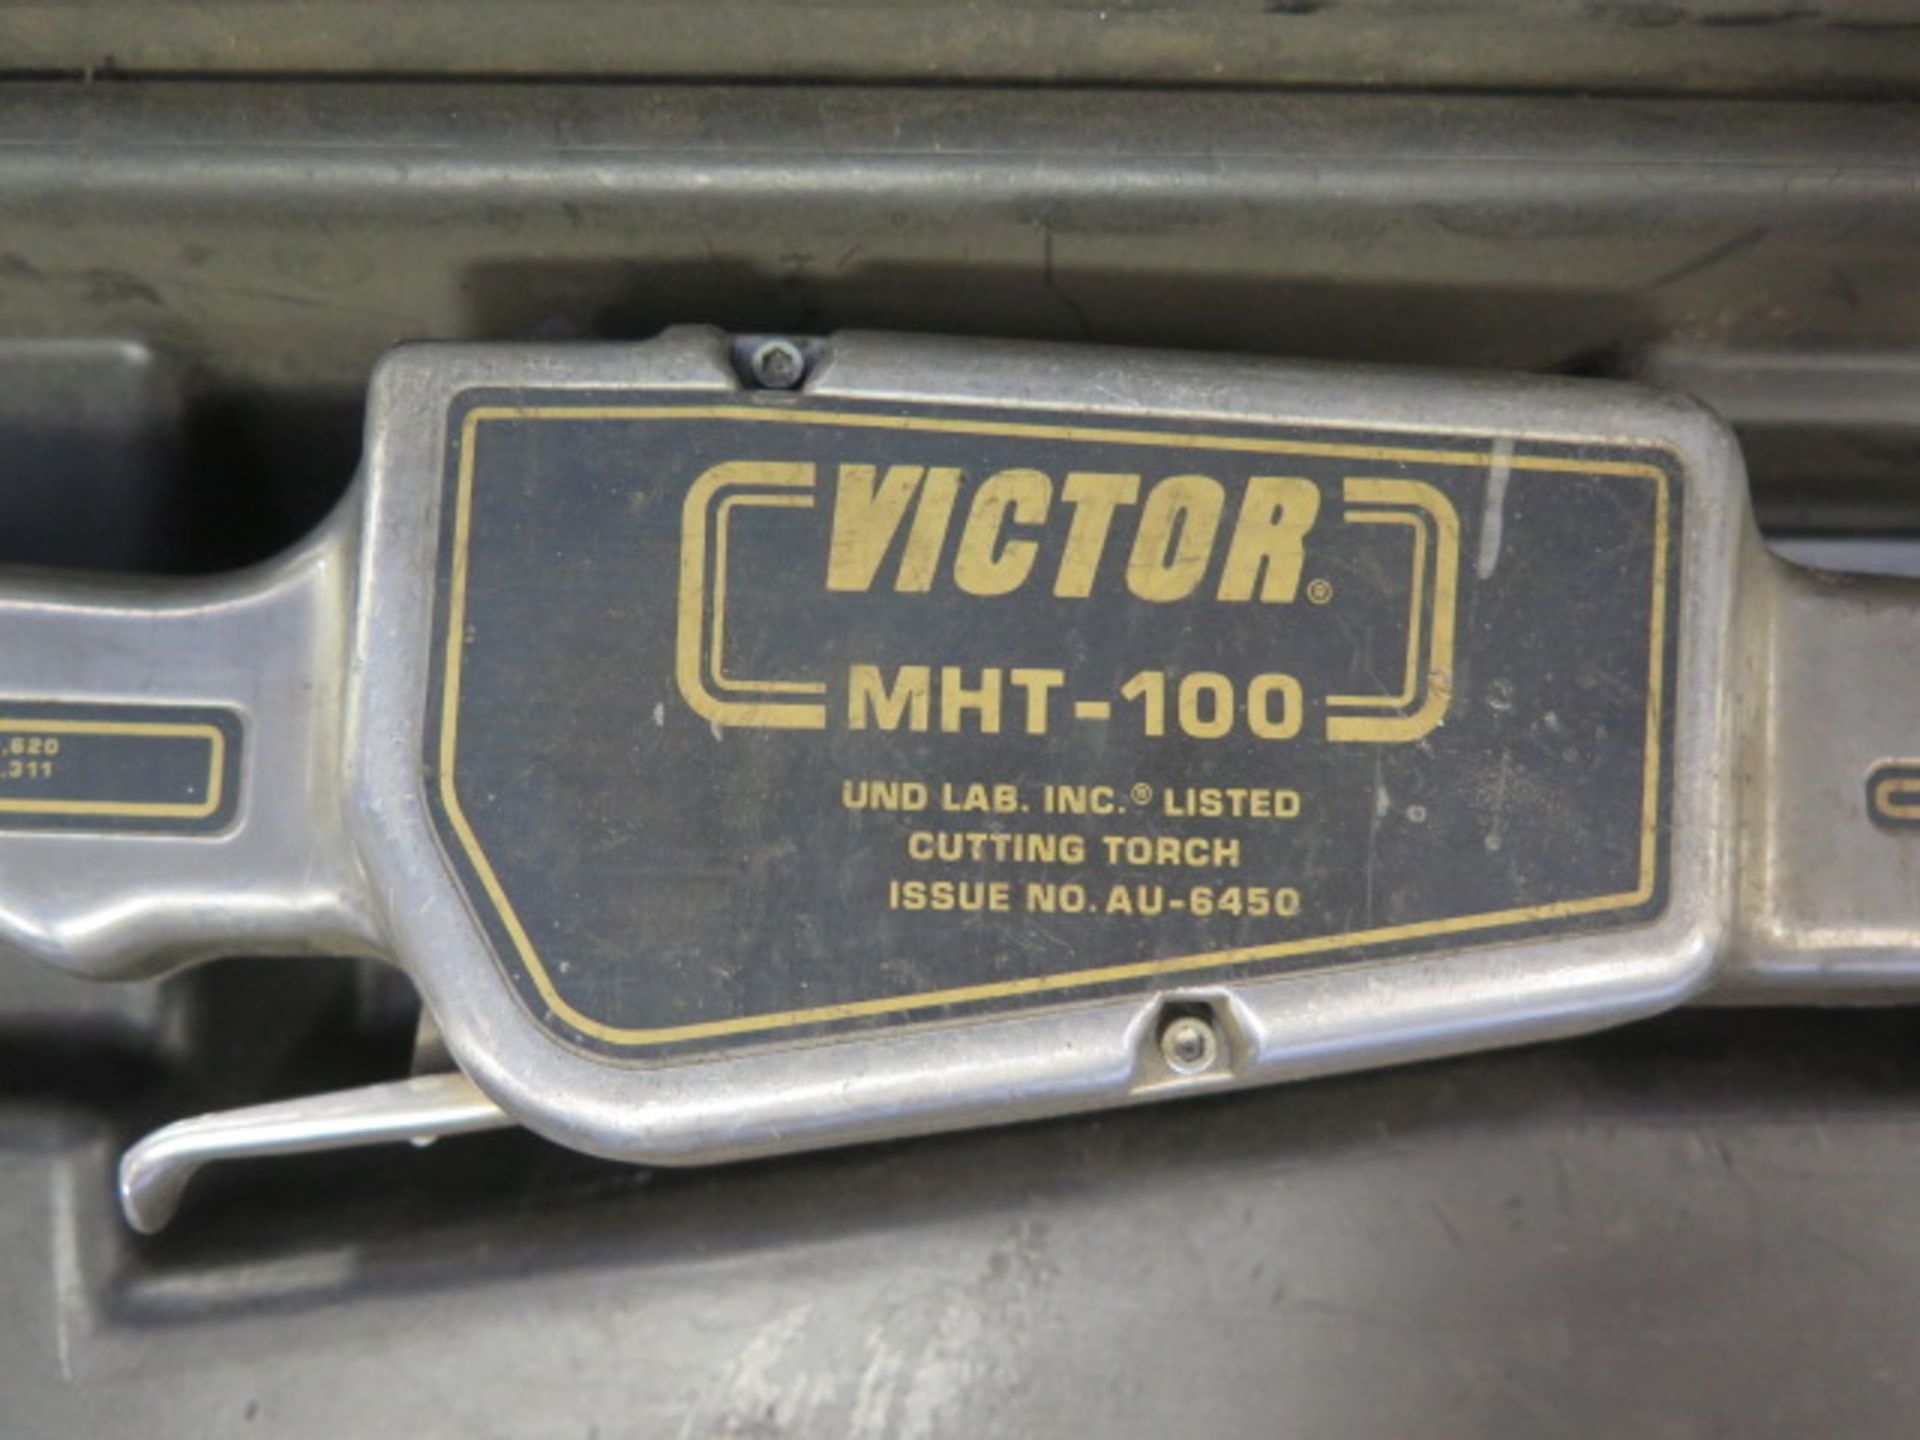 Victor MHT-100 Motorized Hand Torch w/ Hoses (SOLD AS-IS - NO WARRANTY) - Image 5 of 7